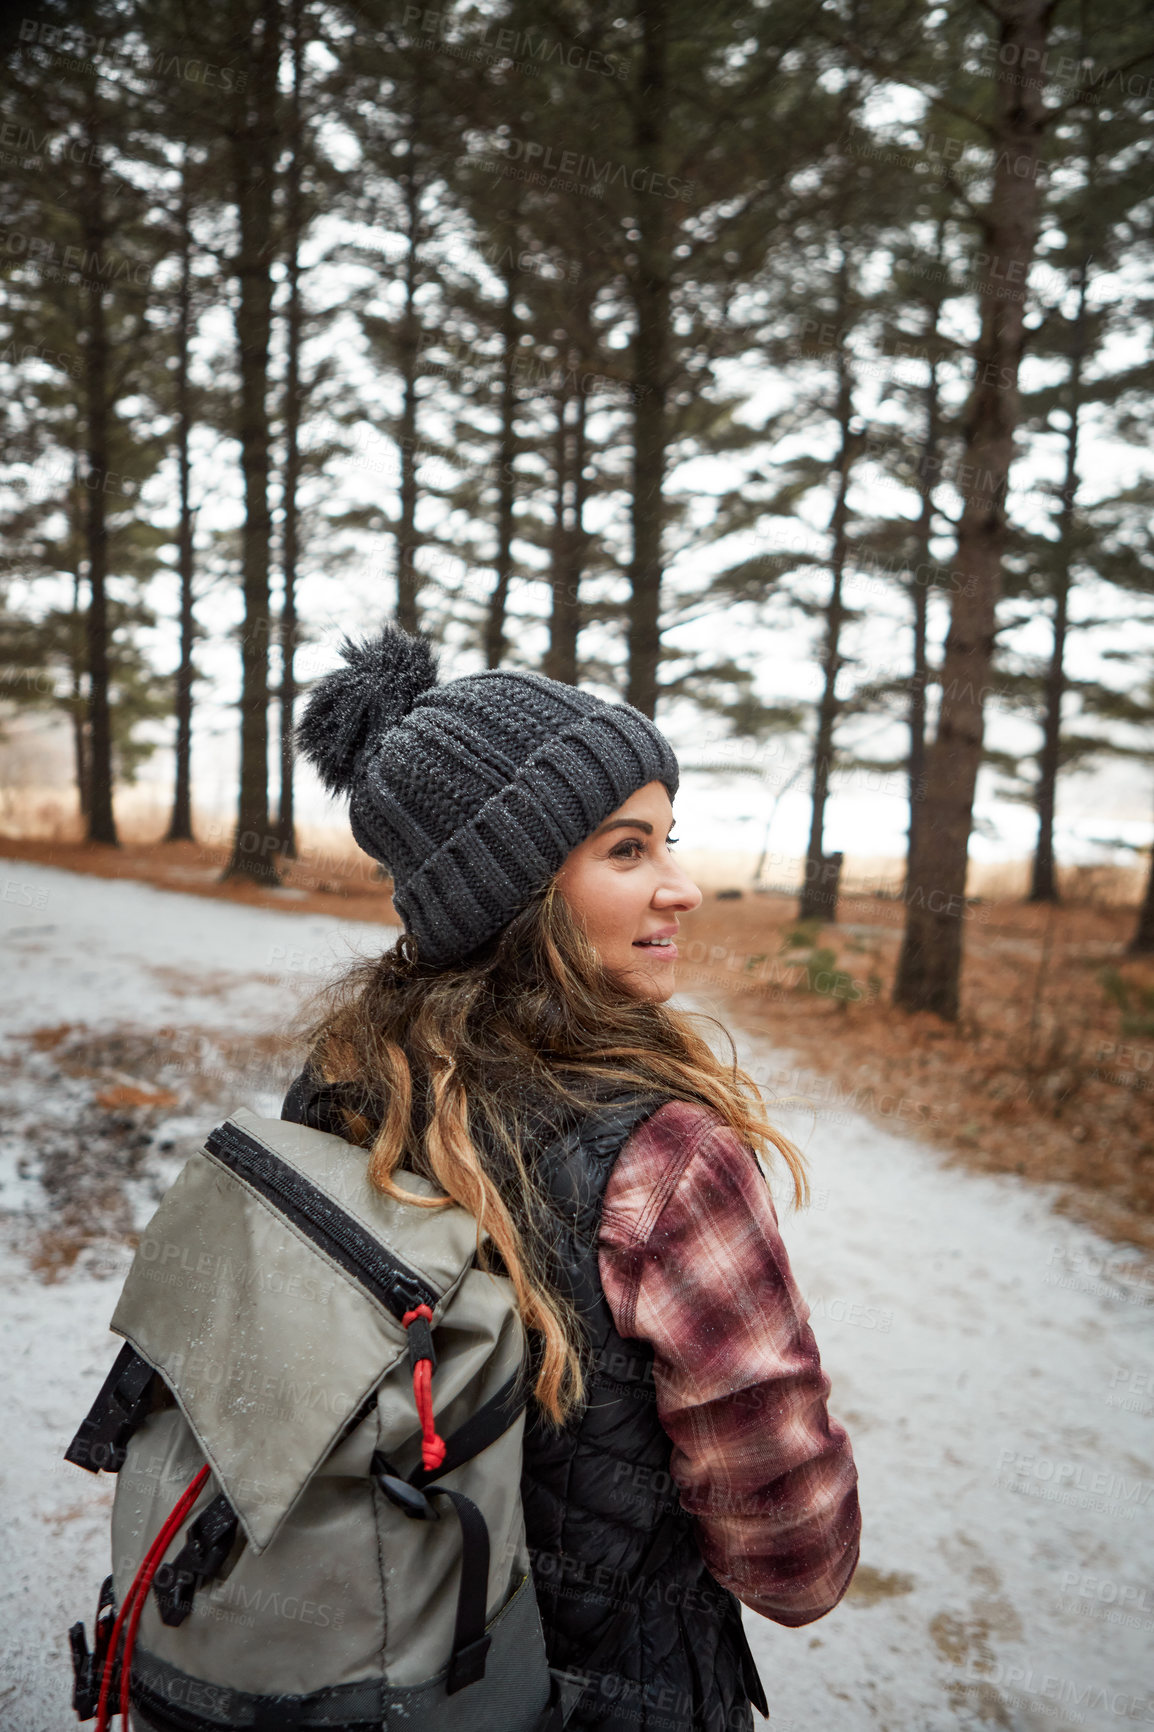 Buy stock photo Rearview shot of a young woman hiking in the wilderness during winter